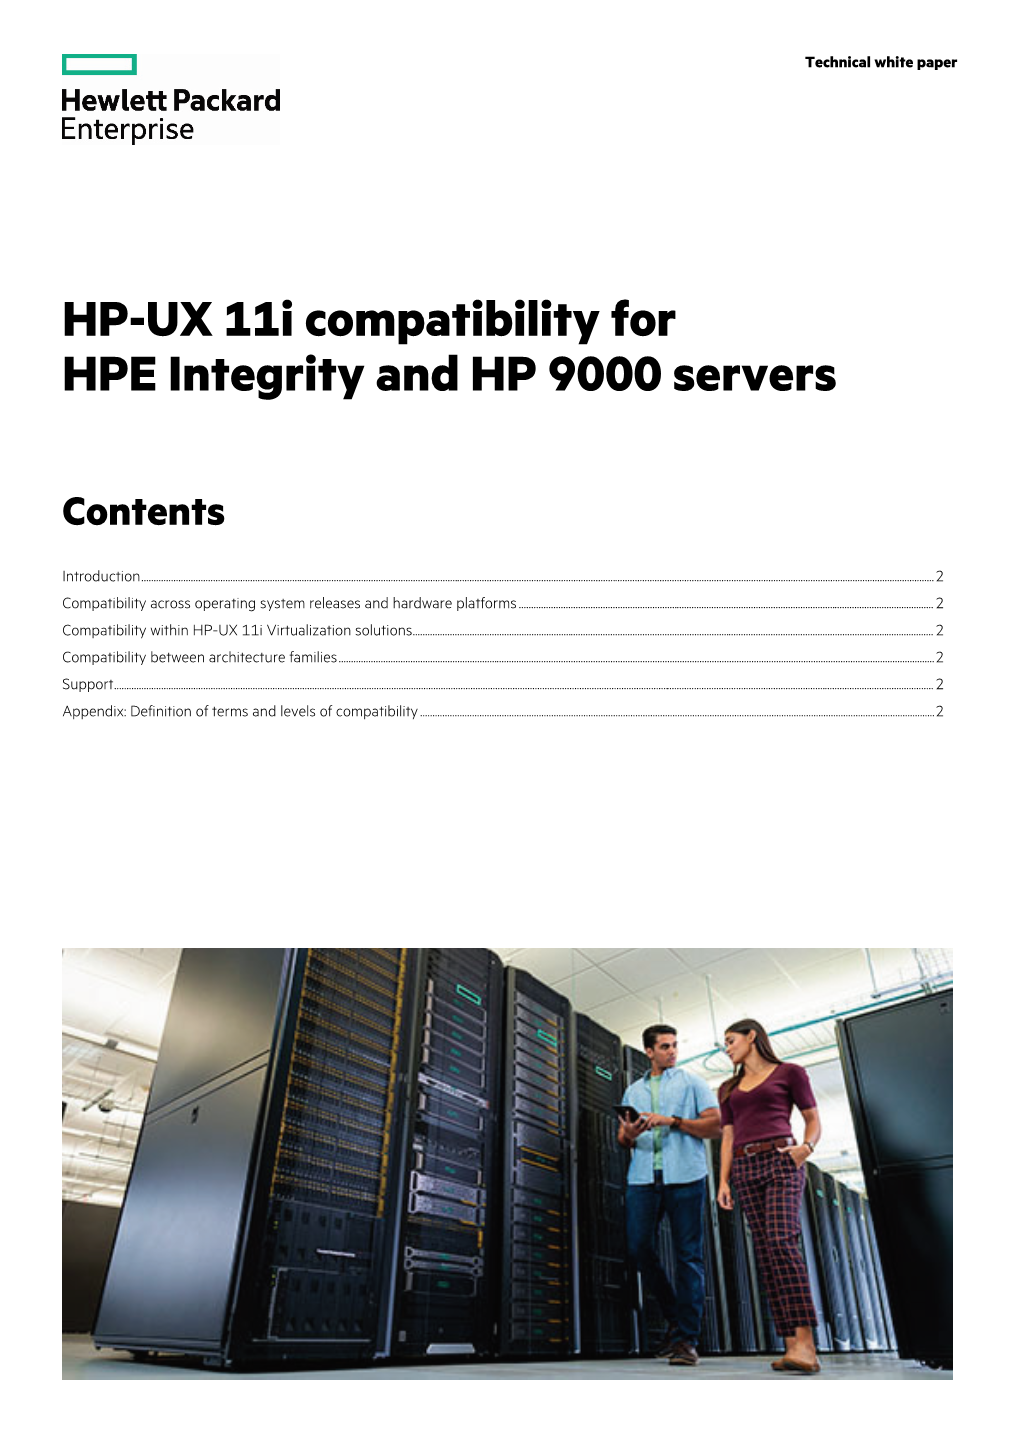 HP-UX 11I Compatibility for HPE Integrity and HP 9000 Servers